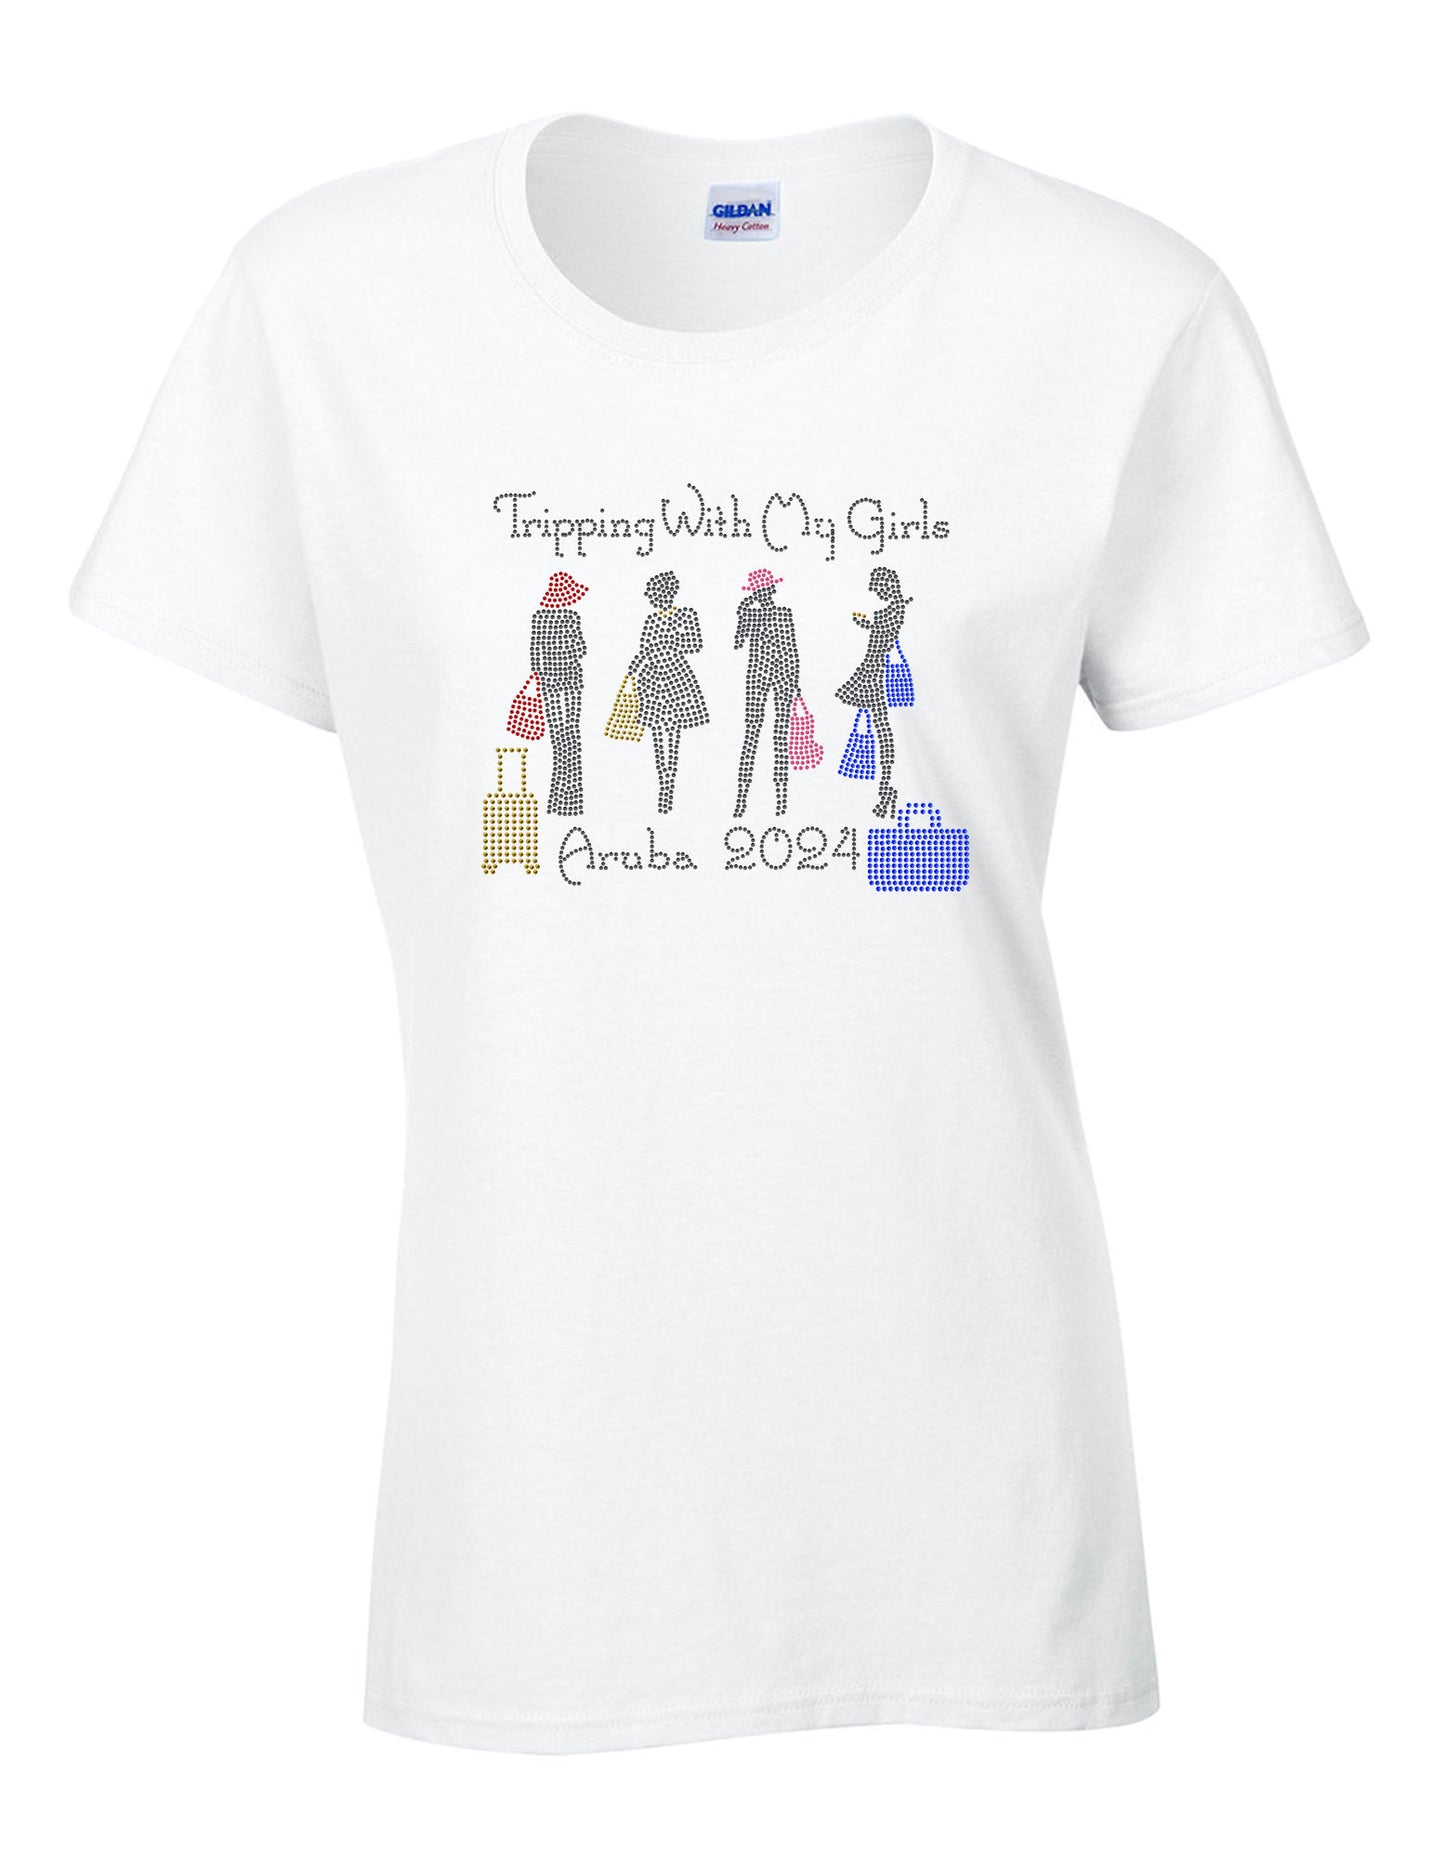 Tripping With My Girls Personalized Rhinestone Tee